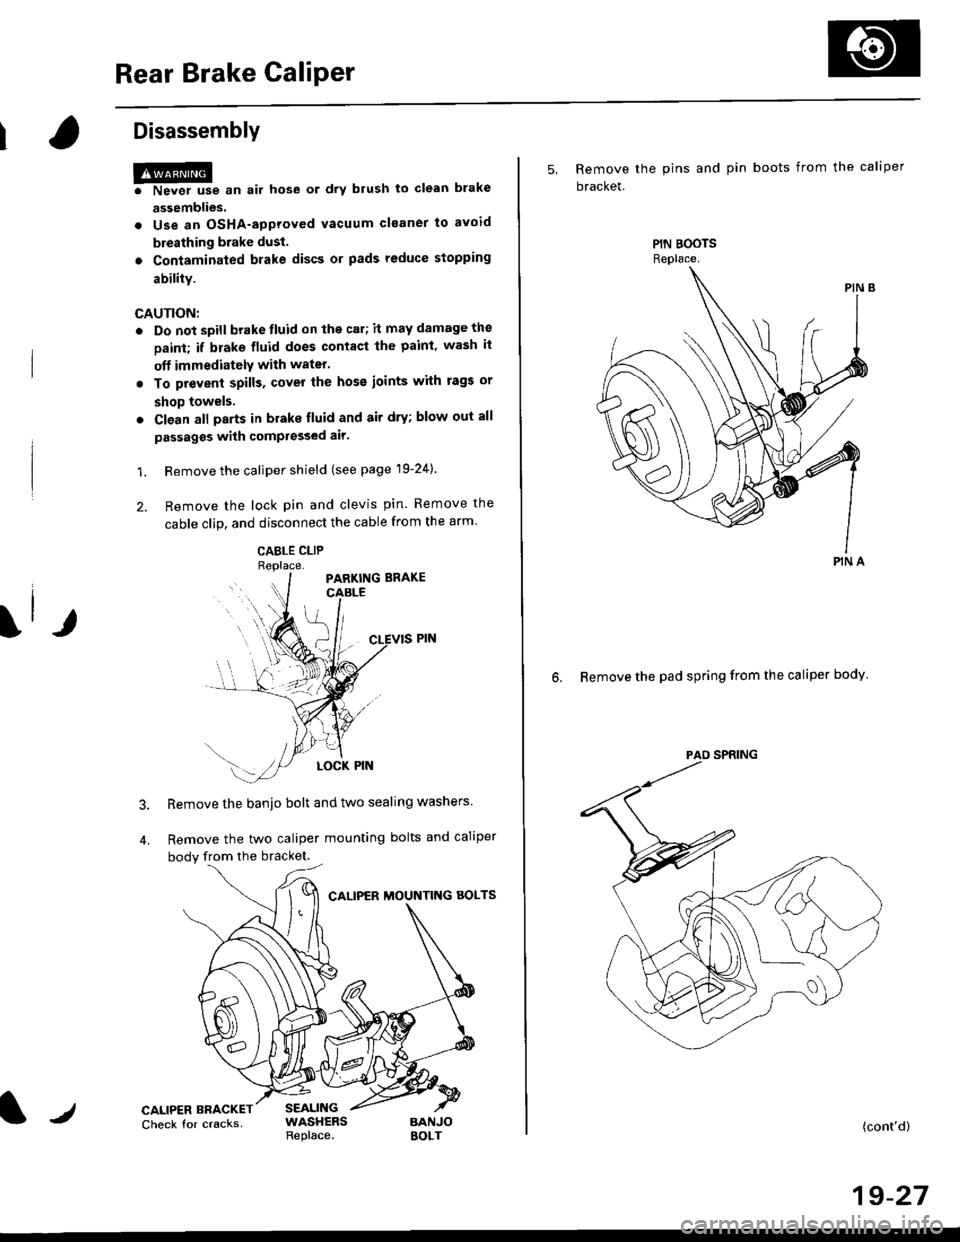 HONDA CIVIC 1997 6.G Owners Manual Rear Brake Caliper
Disassembly
@f l,lever use an air hose or dry brush to clean
assemblies.
. Use an OsHA-approved vacuum cleaner to
brake
avoid
breathing brake dust.
. Contaminated brake discs or pa